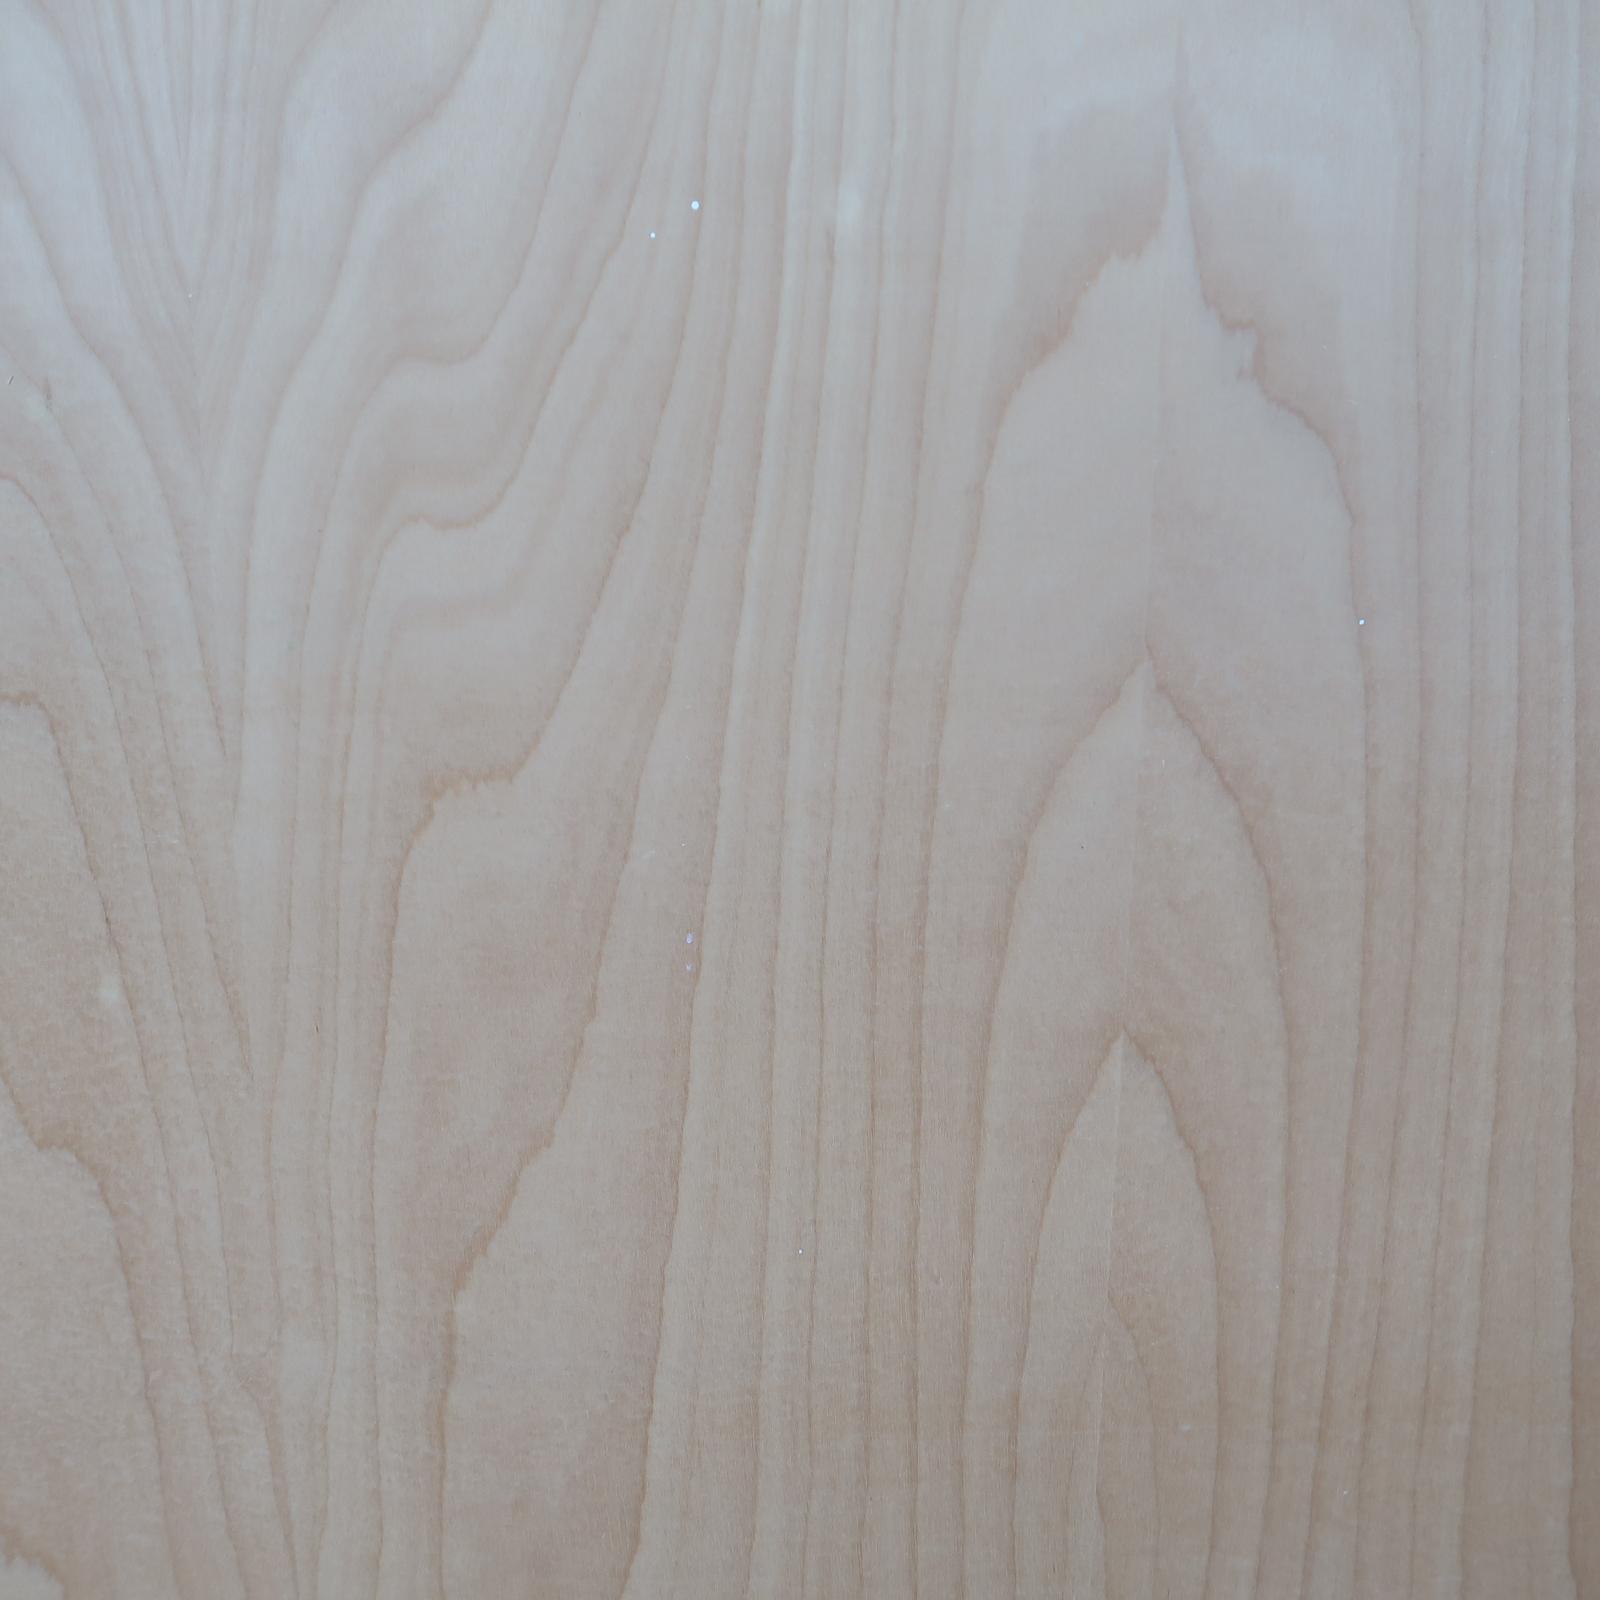 maple finish plywood pieces- 15/32" x 30" x 83 1/2"